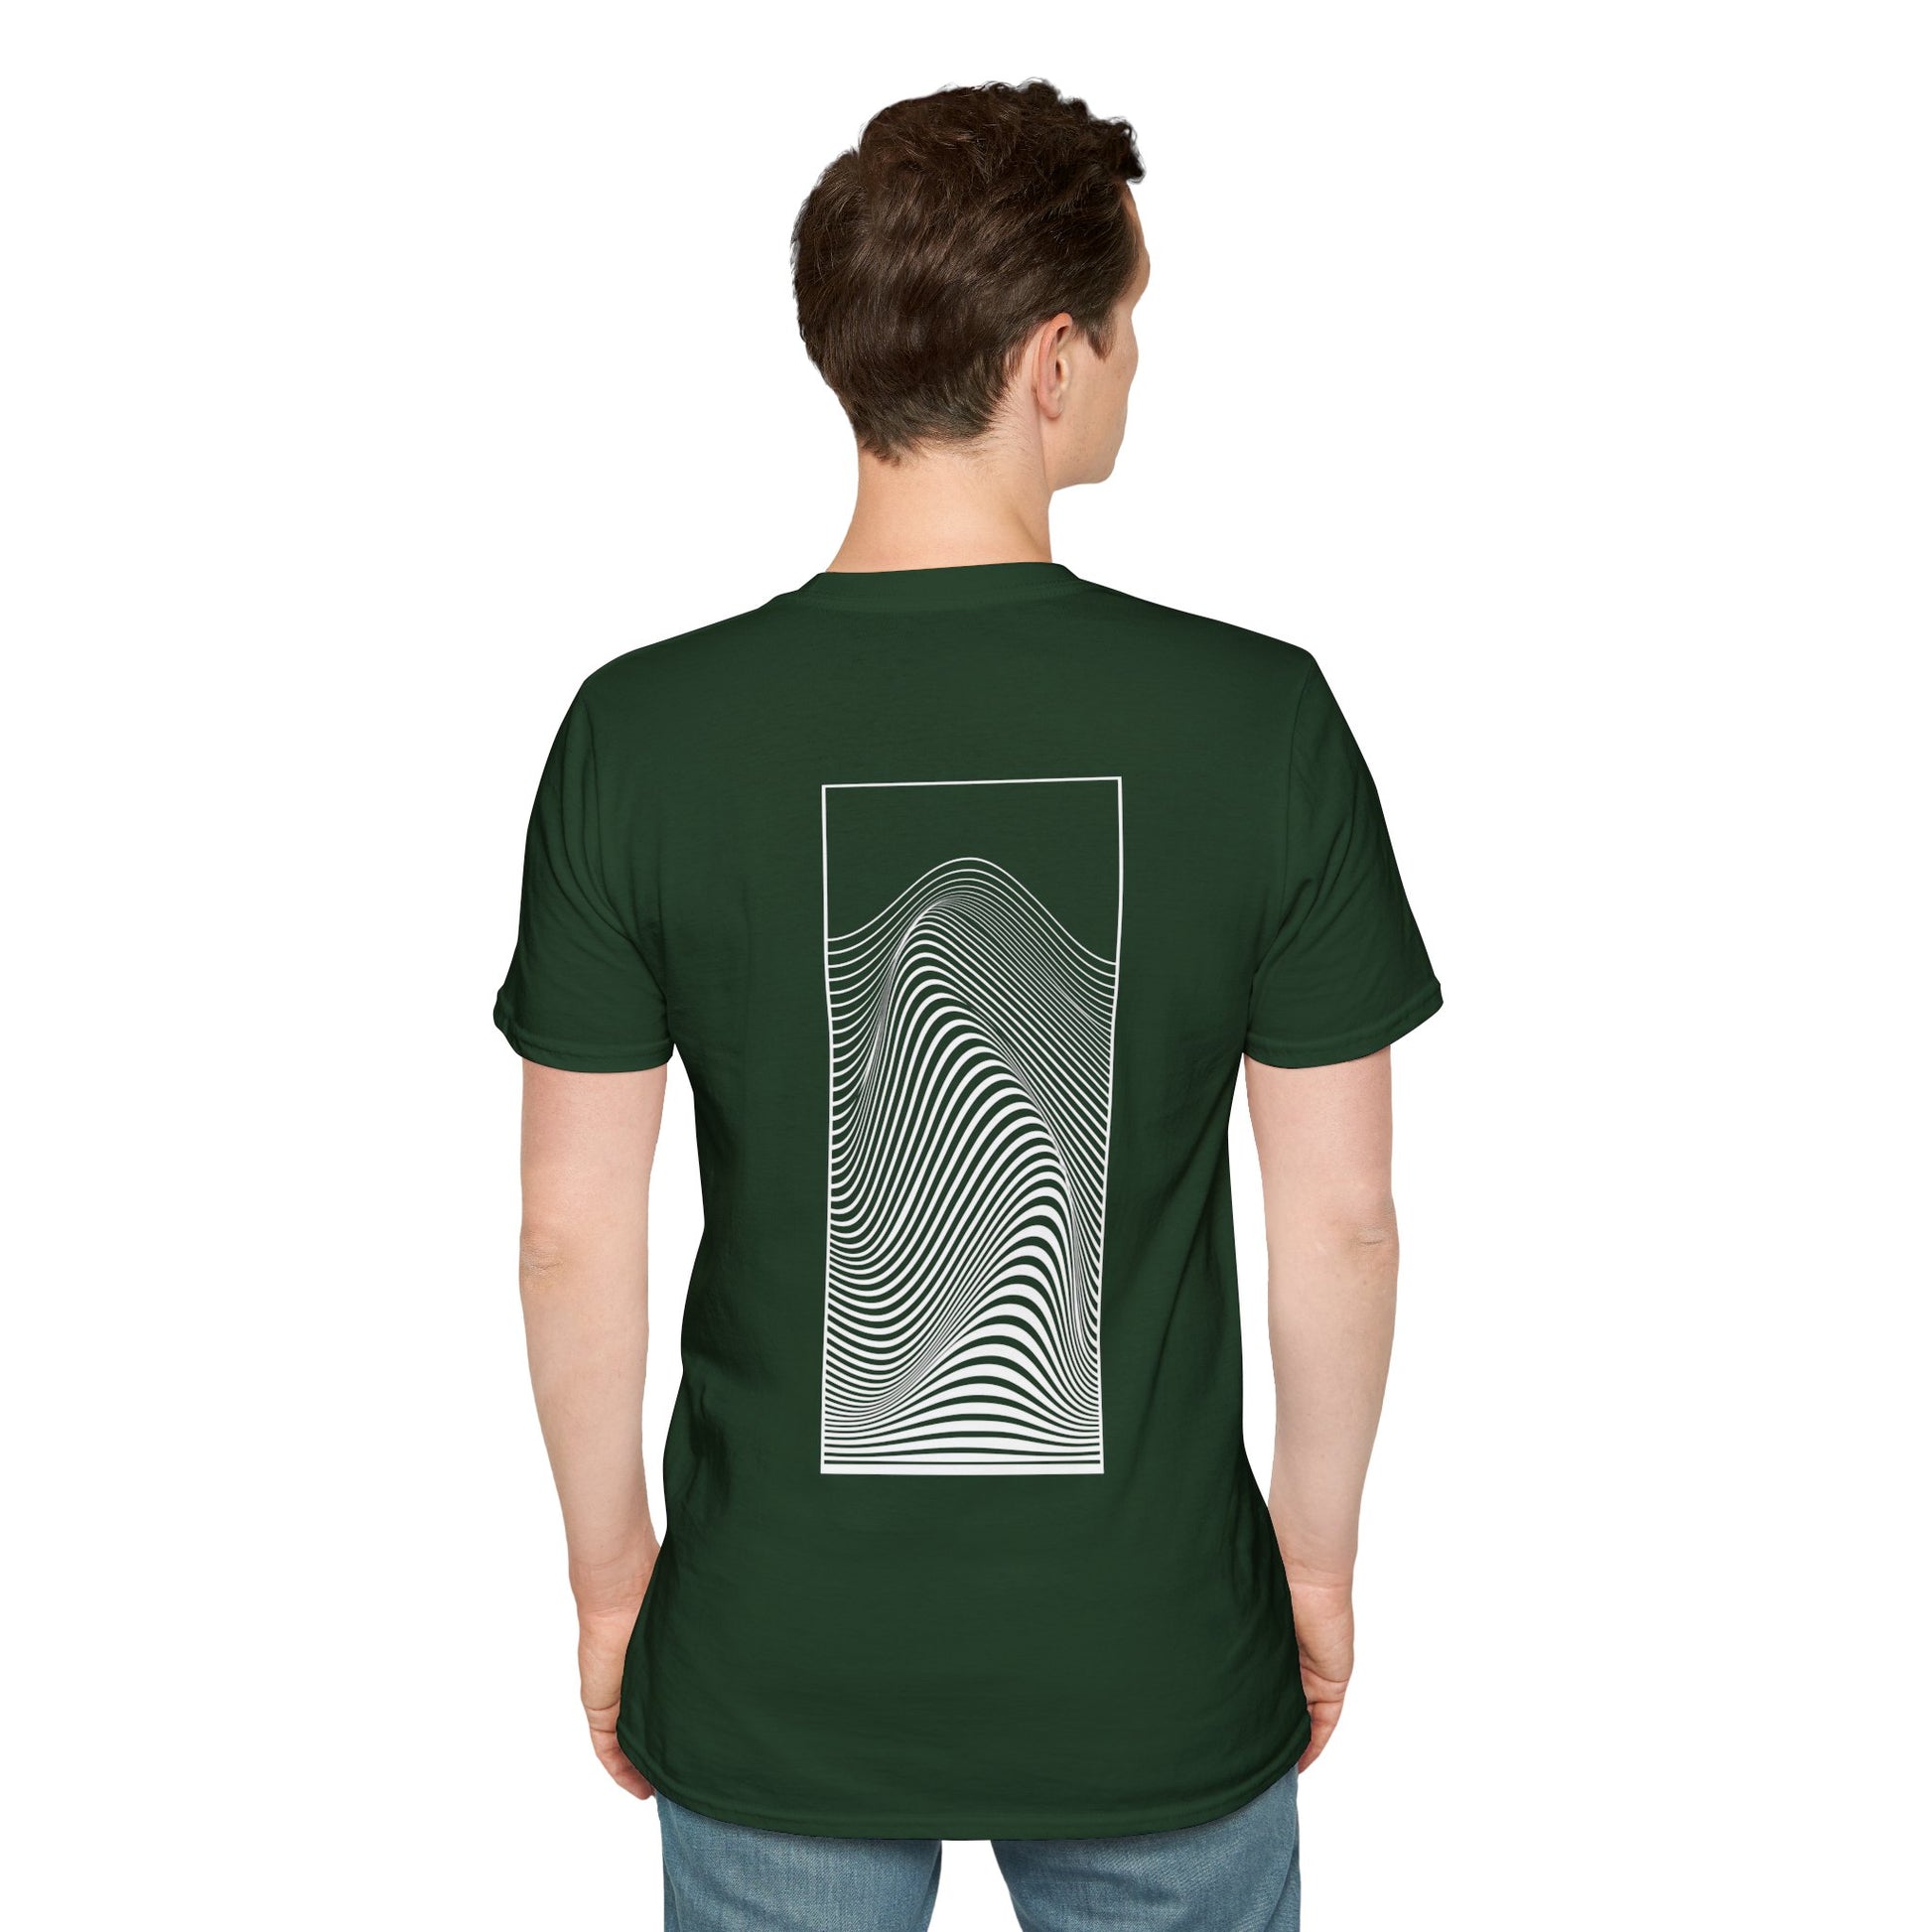 Green T-shirt with a black and white optical illusion design of swirling patterns